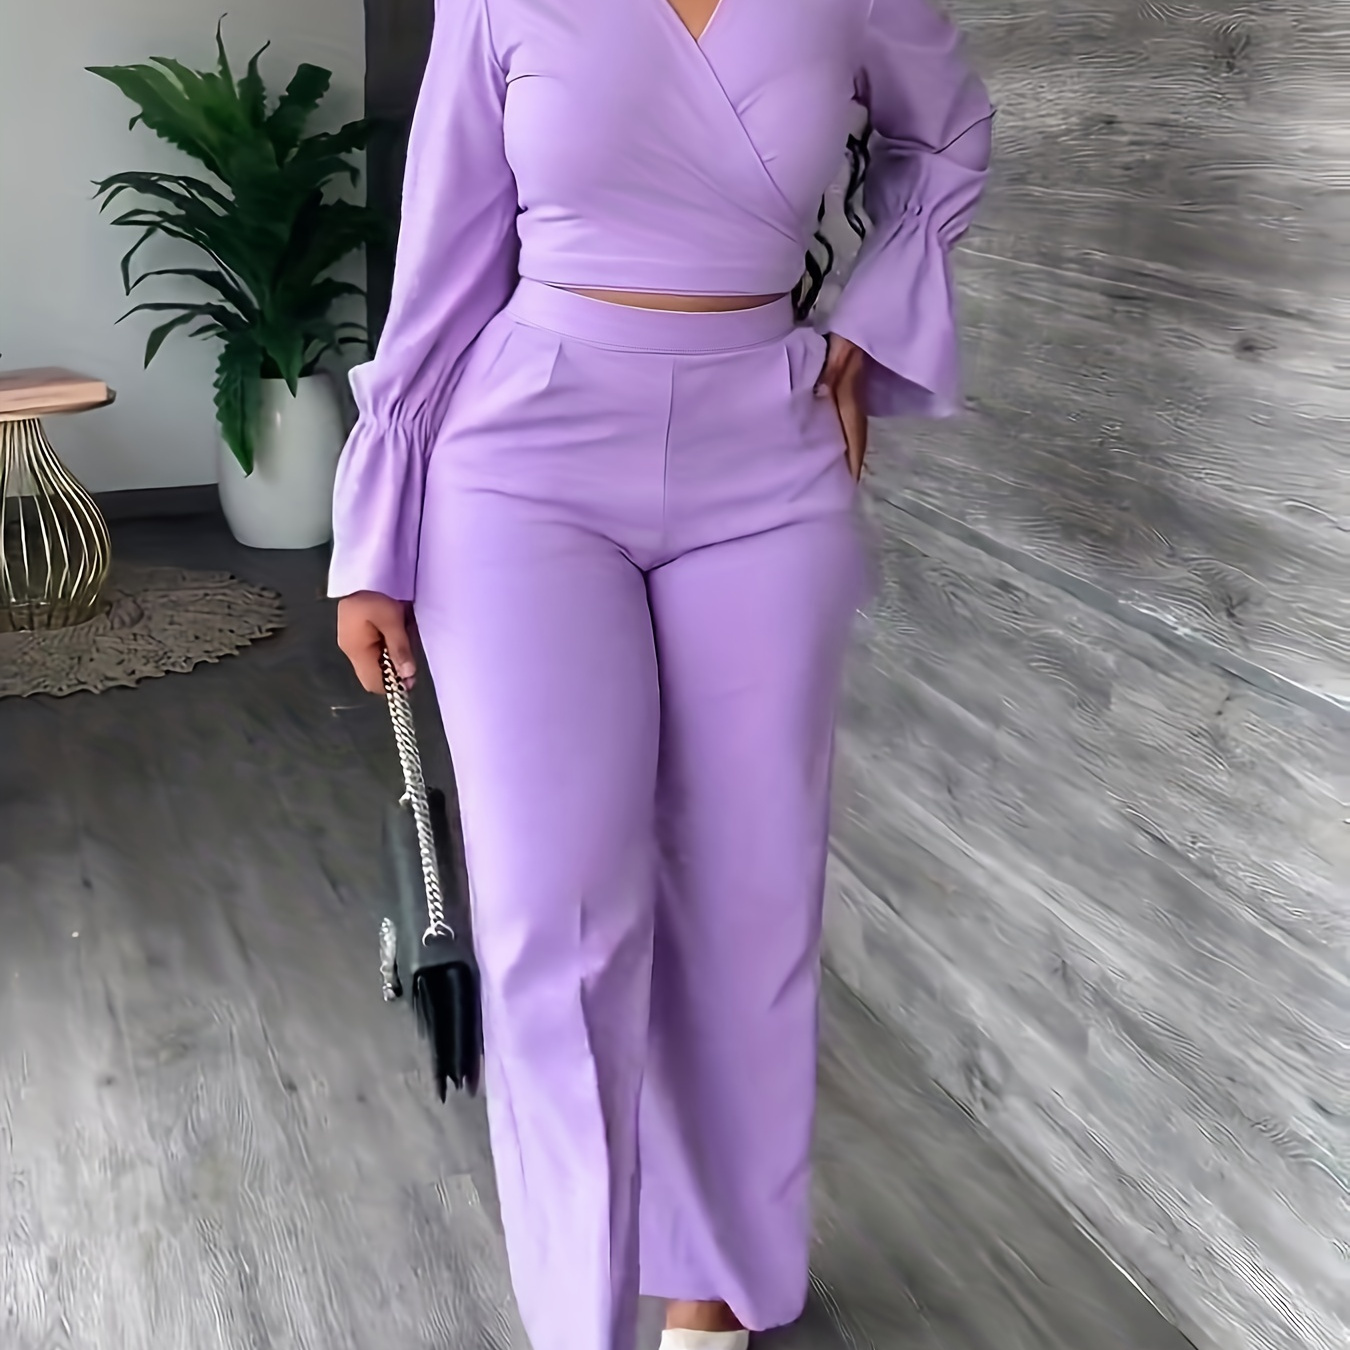 

Solid Casual Two-piece Set, Surplice Neck Long Sleeve Tops & High Waist Wide Leg Pants Outfits, Women's Clothing